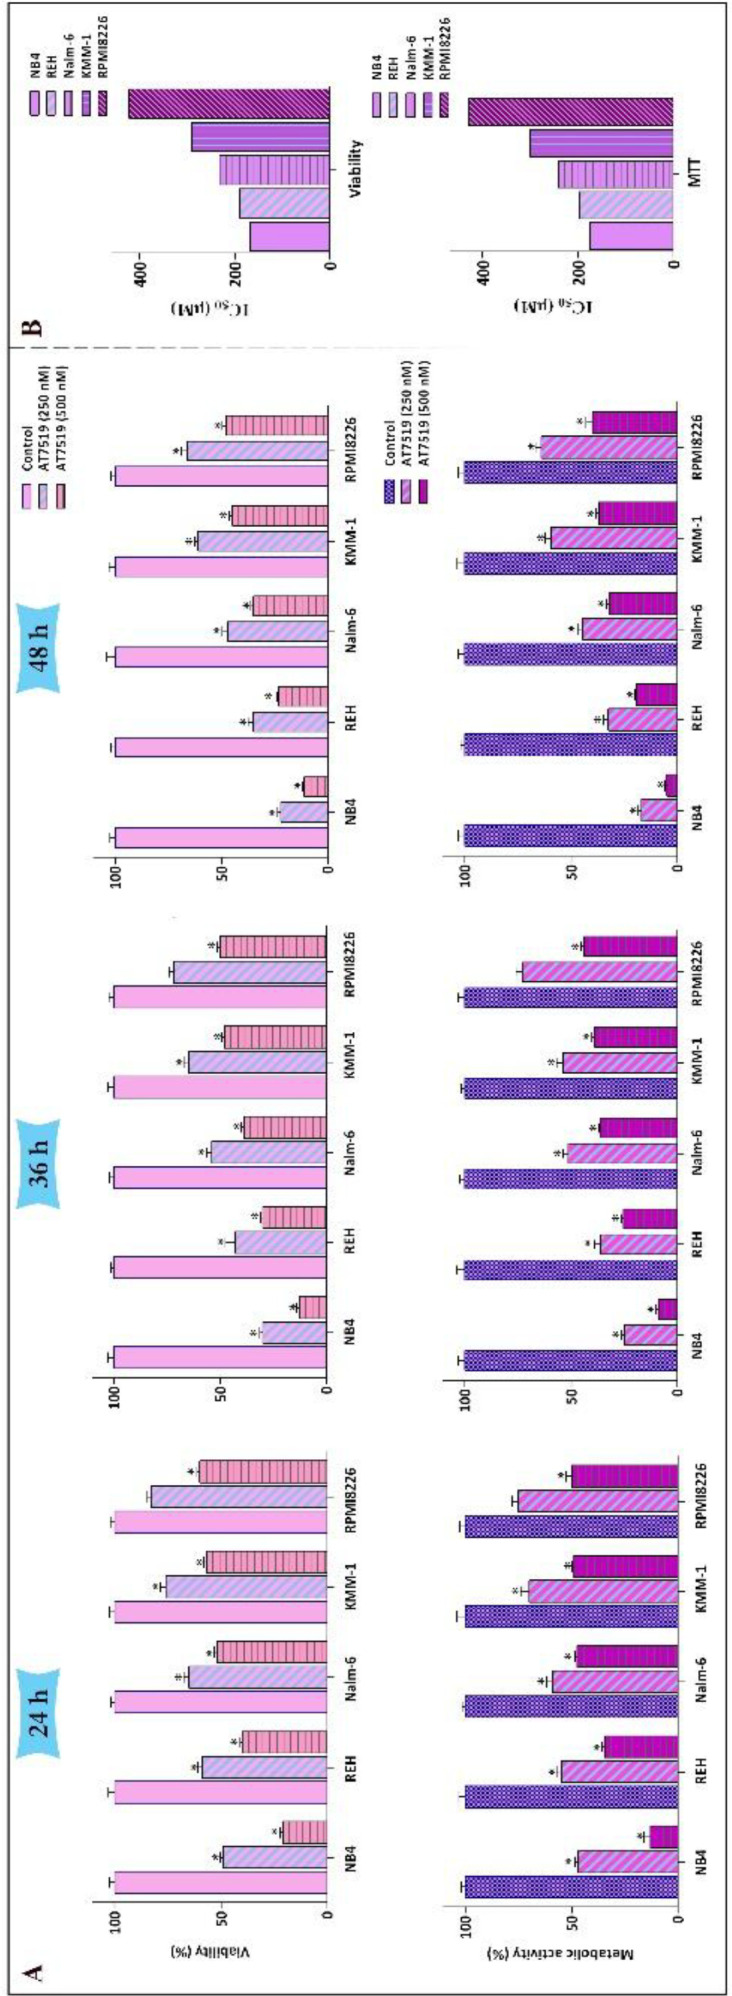 The anti-survival impact of AT7519 on a panel of leukemic cells. (A) Treatment of the cells with various concentrations of AT7519 abated both the viability and the metabolic activity in time- and concentration-dependent manners. (B) IC50 values were measured for two varied methods of survival assessment. Values are provided as mean ± SD of three separated tests. *P ≤ 0.05 represents considerable alters from untreated control